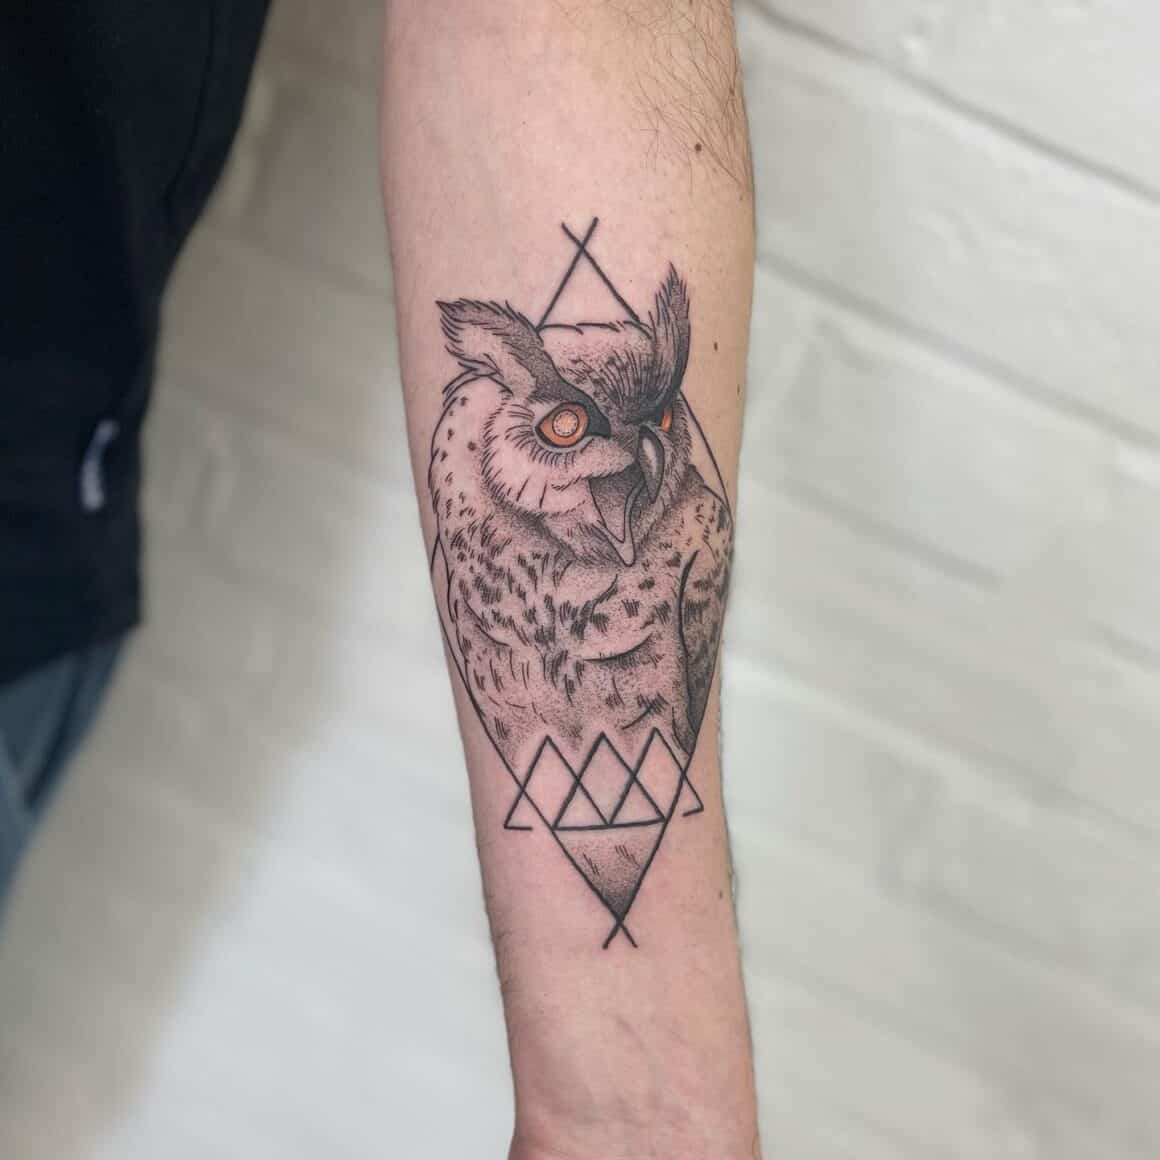 High Voltage Tattoo on Twitter Any BladeRunner fans out there Heres an  awesome tattoo of the owl wthe Tyrell Corp logo by ArtOfKevinLewis  httptcoLNLu3E4FVe  X